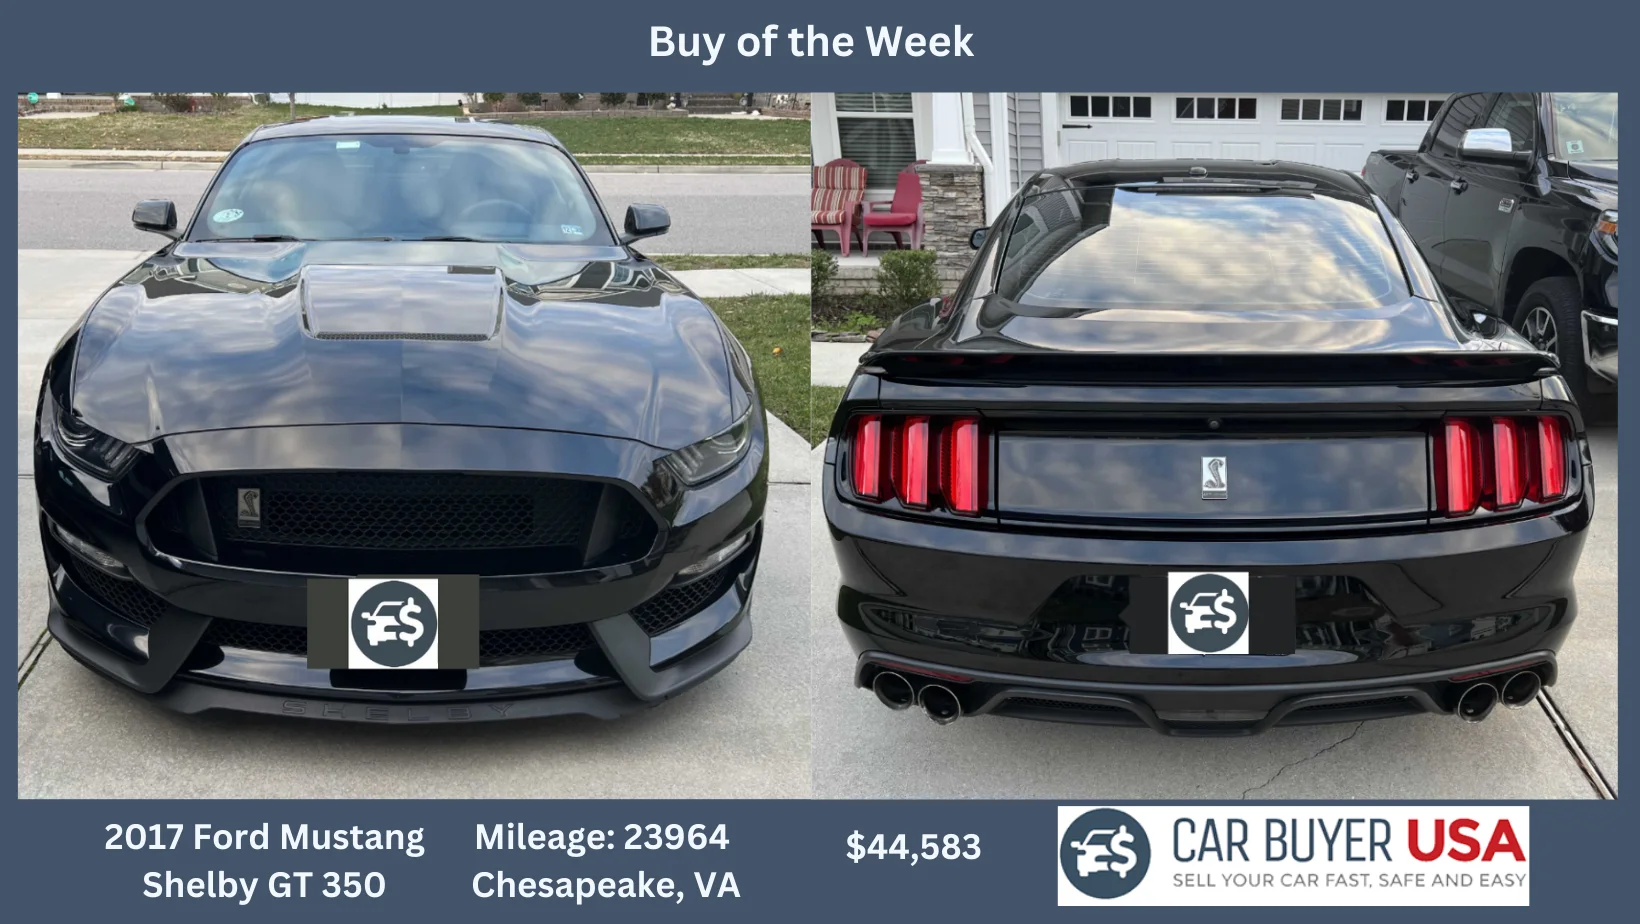 CarBuyerUSA - 2017 Ford Mustang Shelby GT350 - $44,583